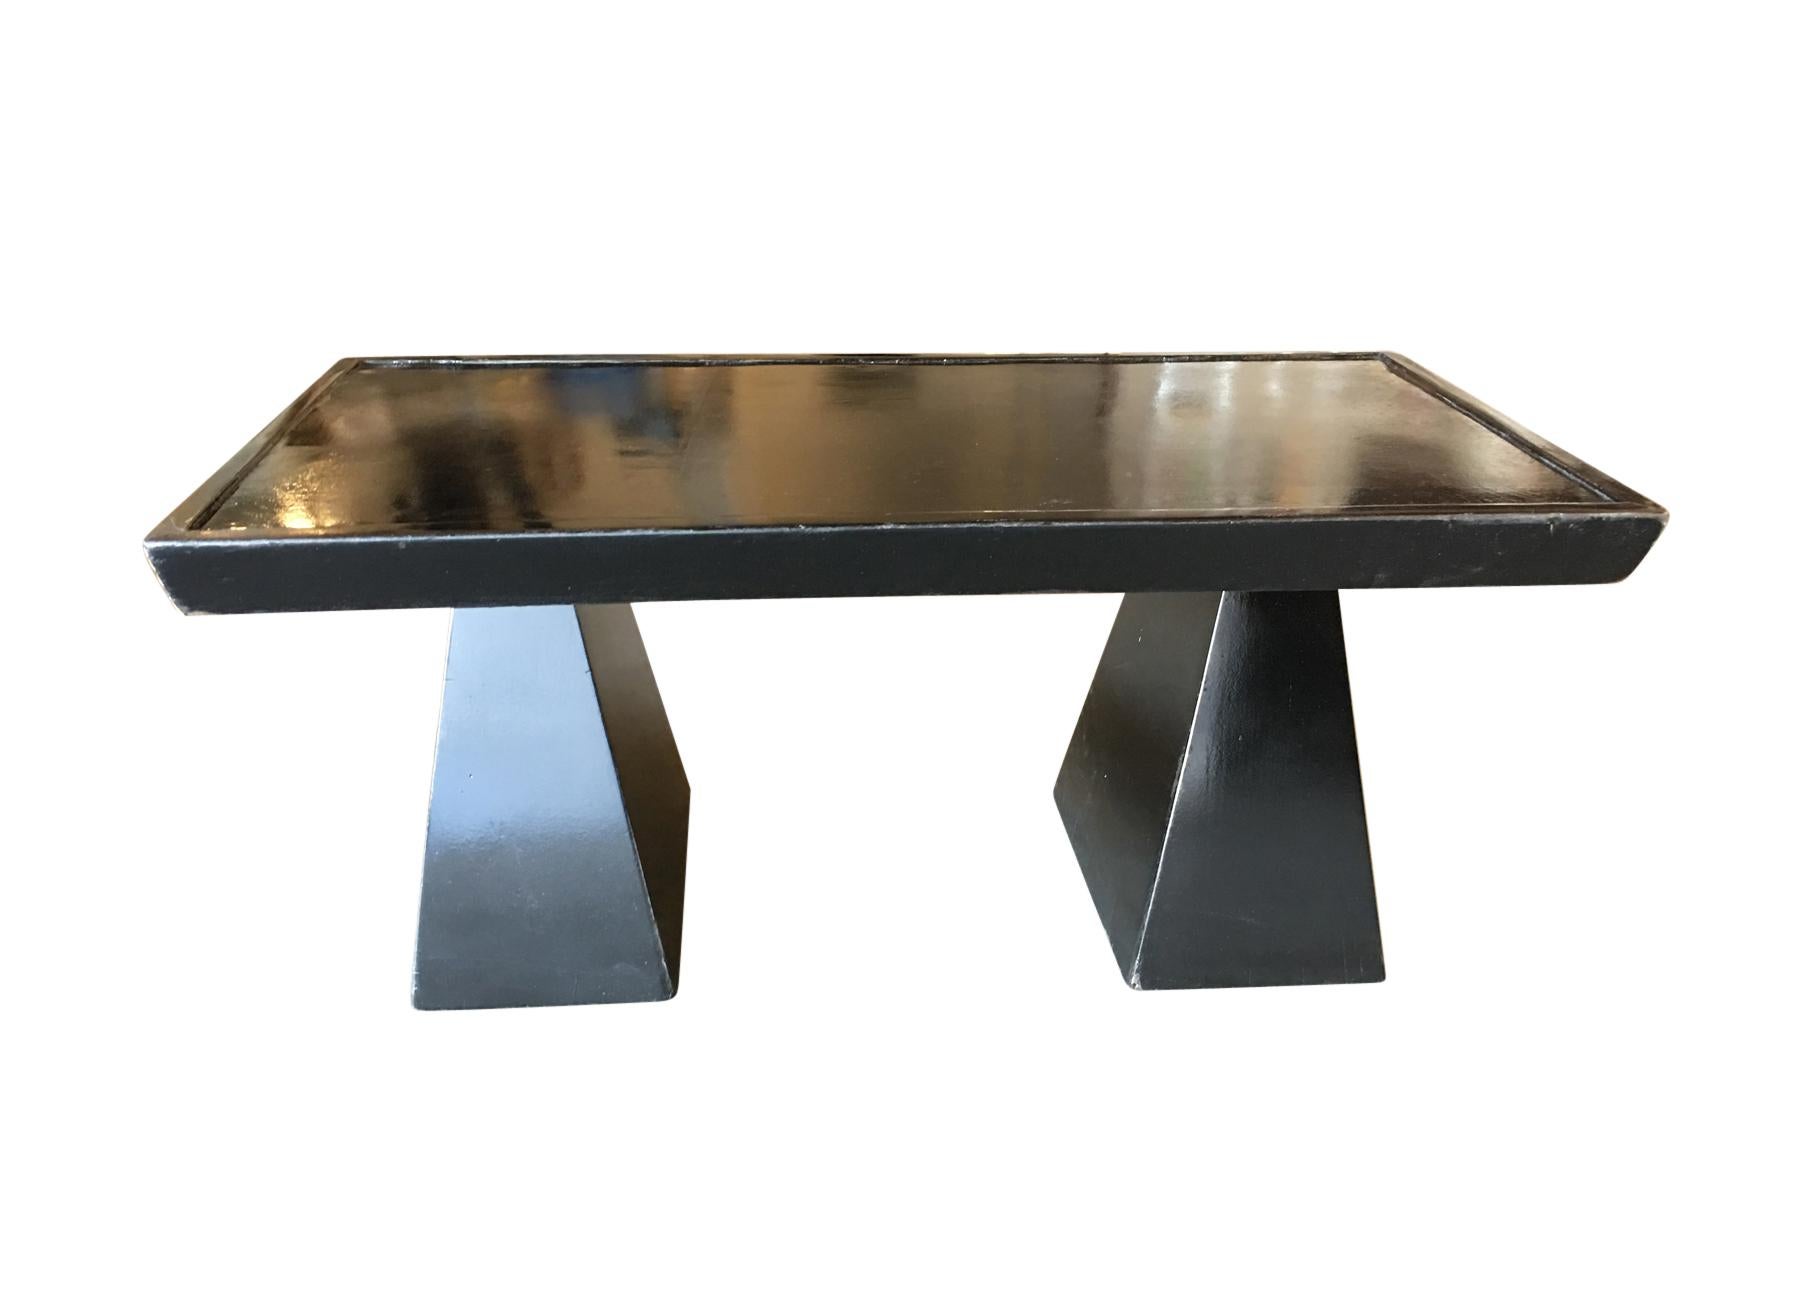 Original 1950s black lacquer Cubist inspired geometric sculptural coffee table with a lipped tabletop.